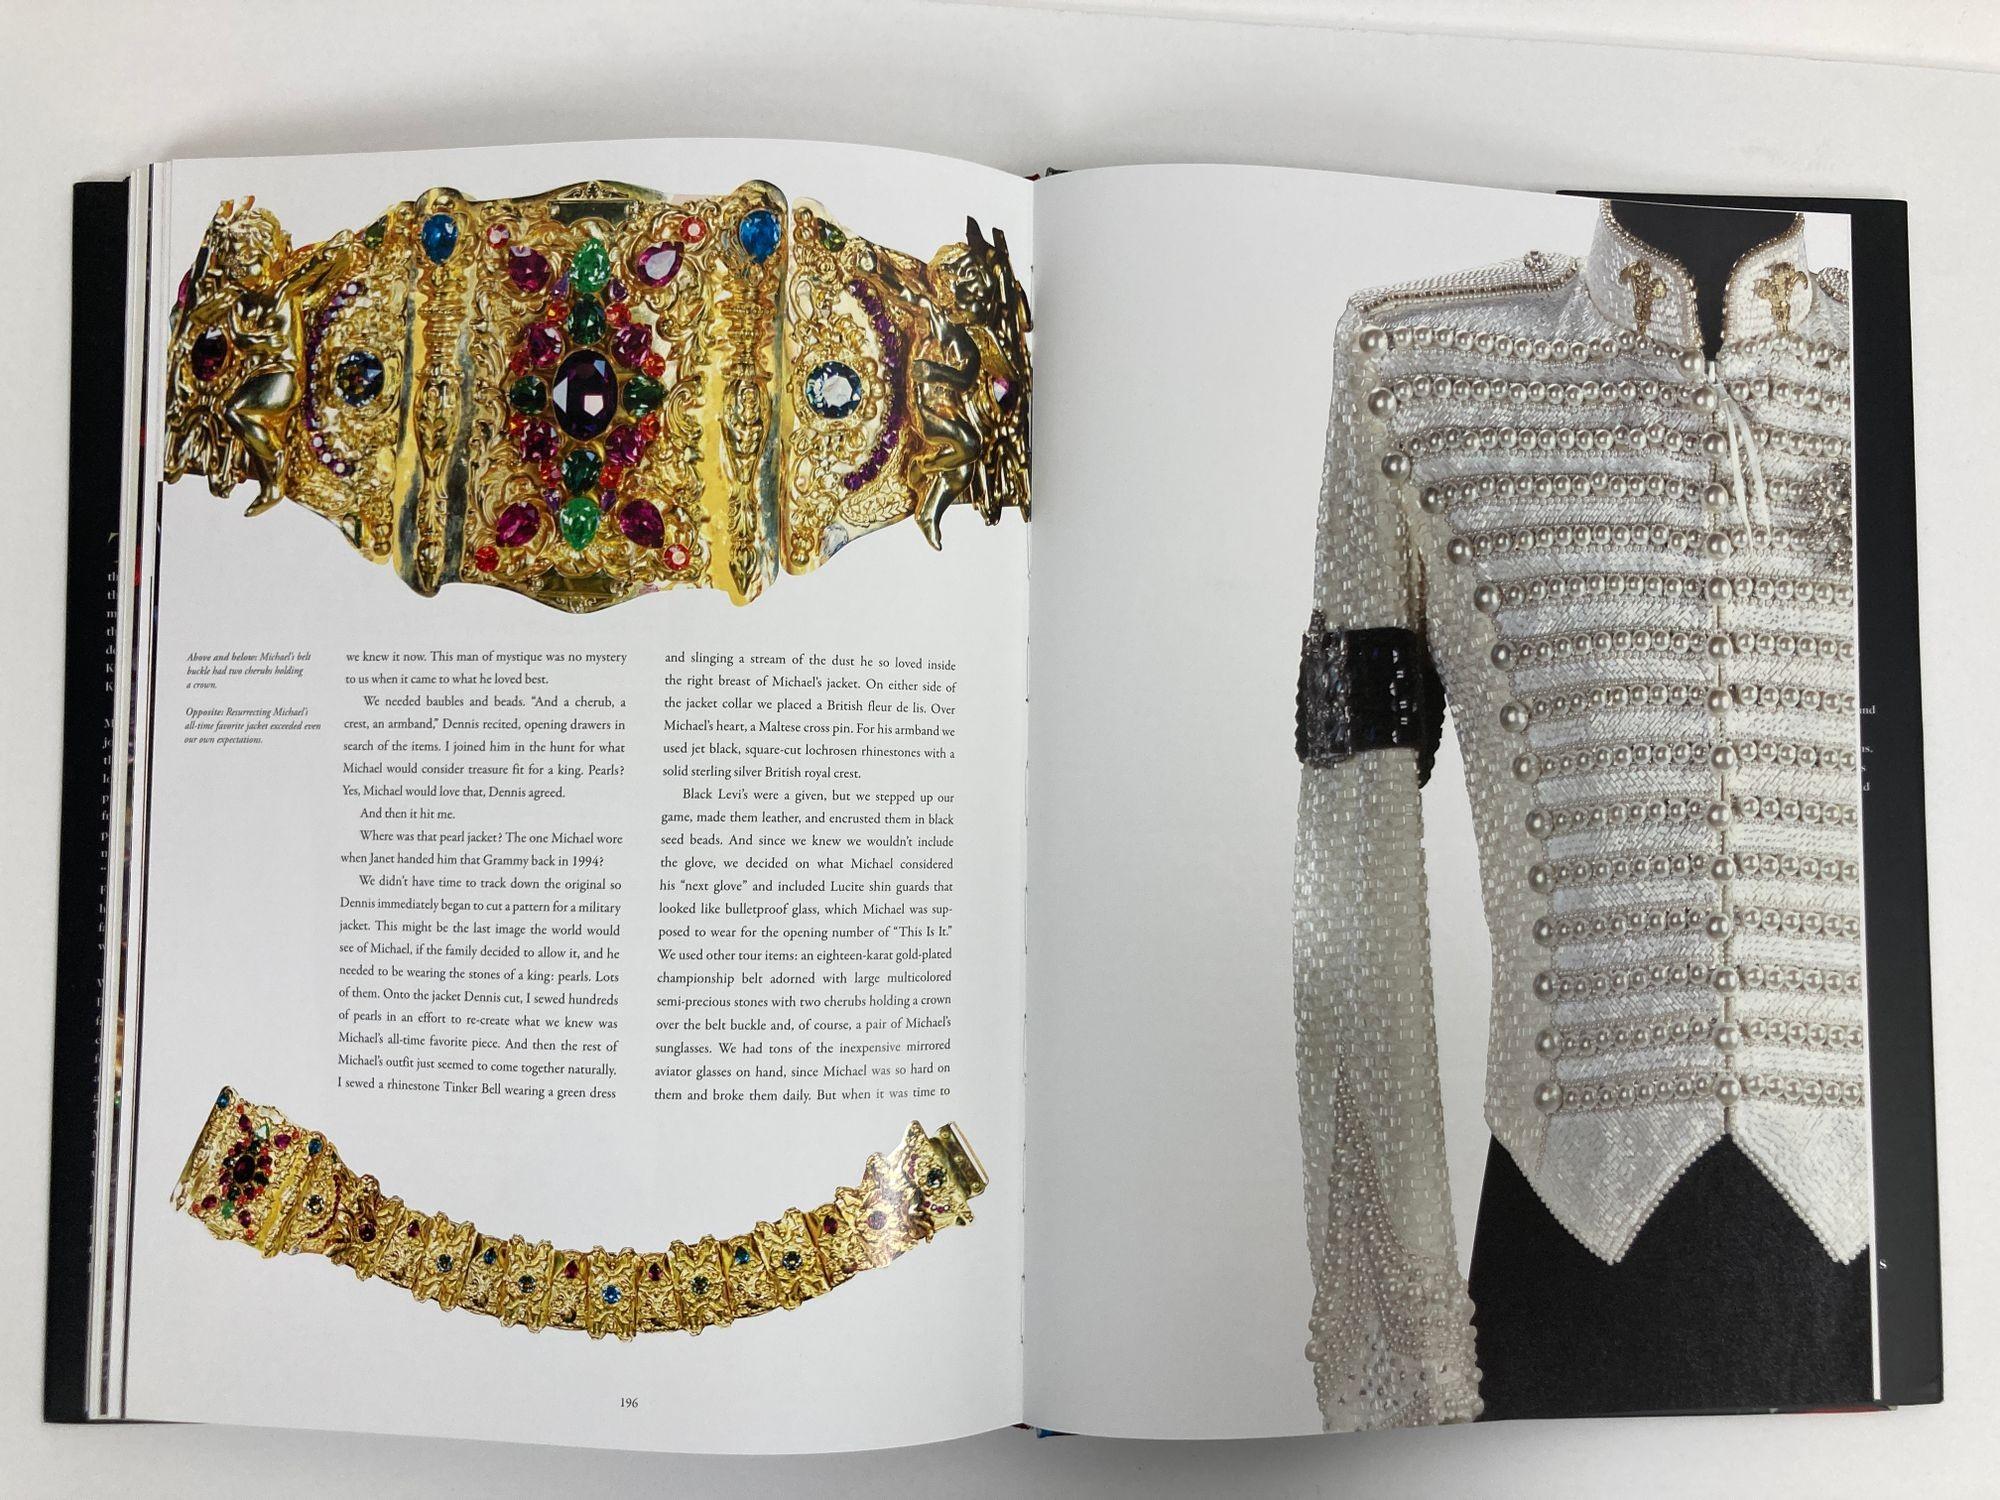 King of Style: Dressing Michael Jackson by Michael Bush Hardcover Book 4